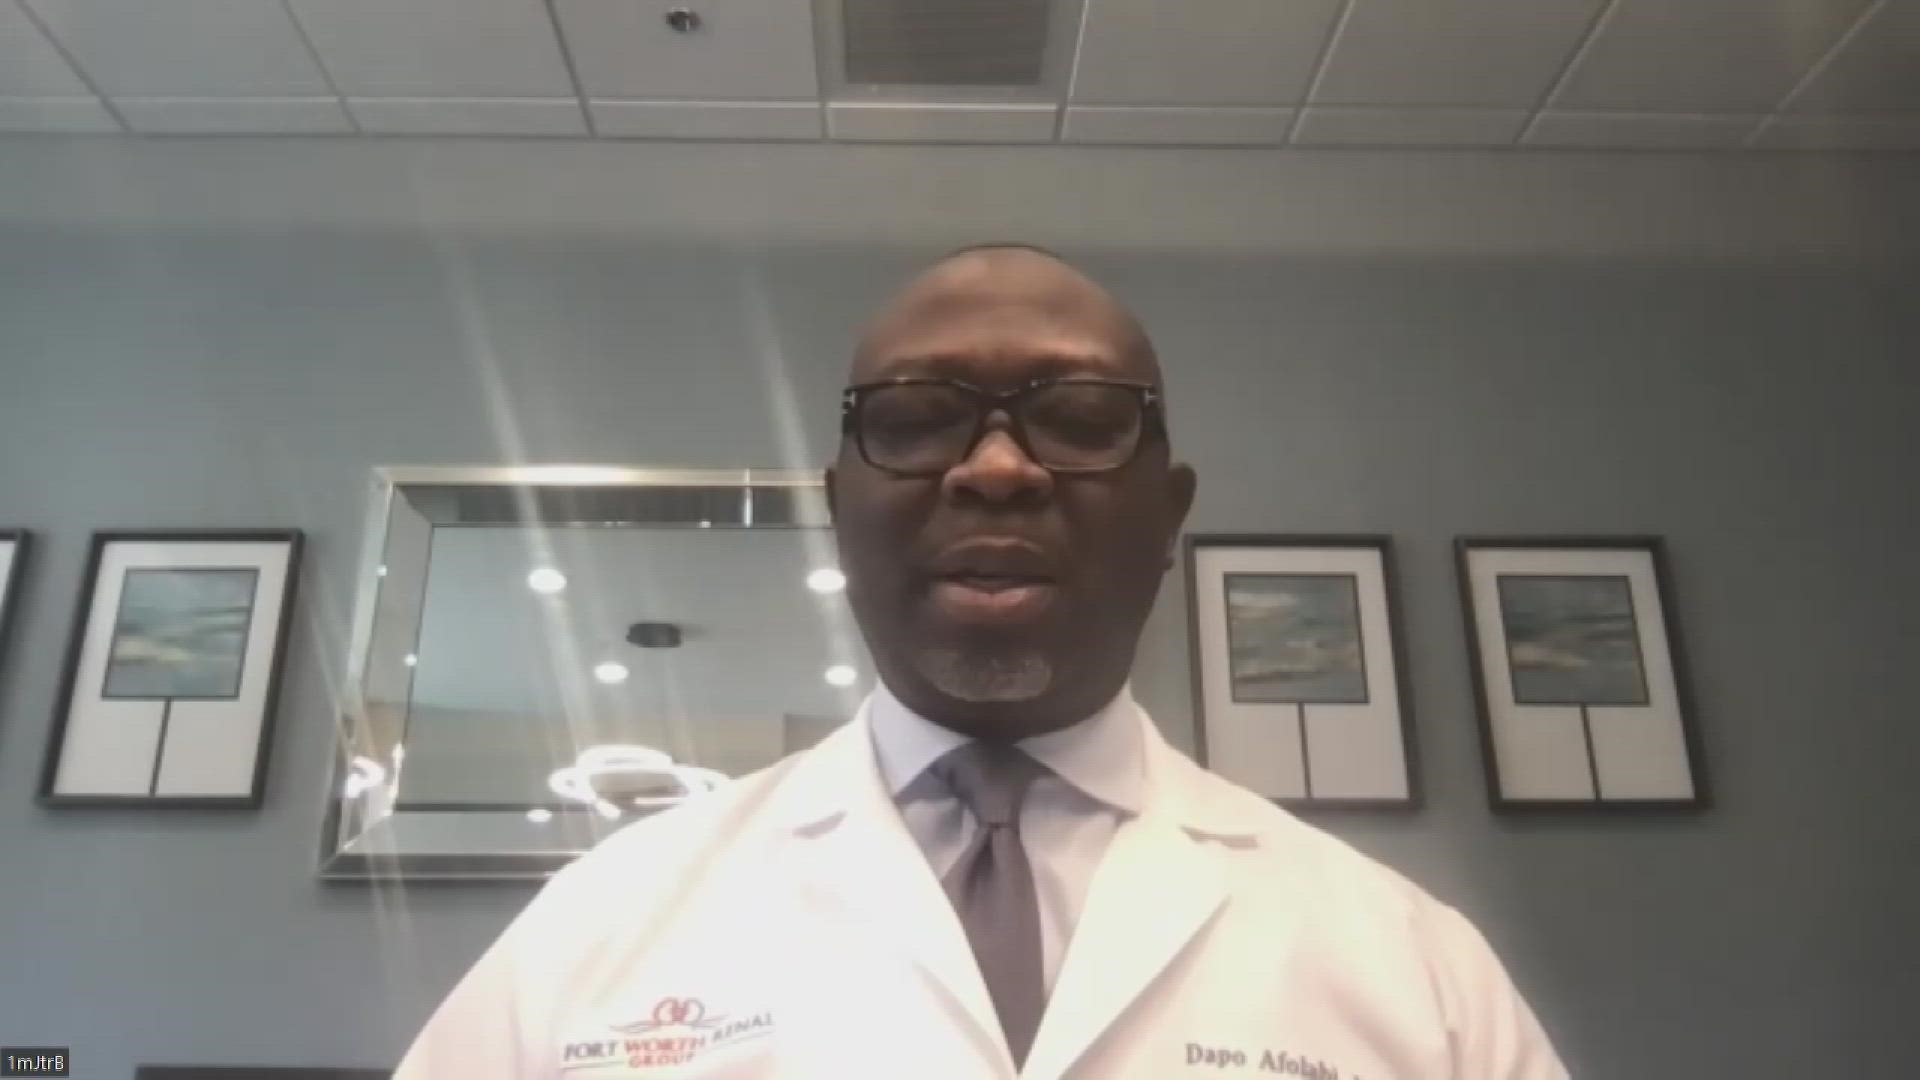 Nephrologist Dr. Oladapo Afolabi explains how most people don’t know they are living with chronic kidney disease.